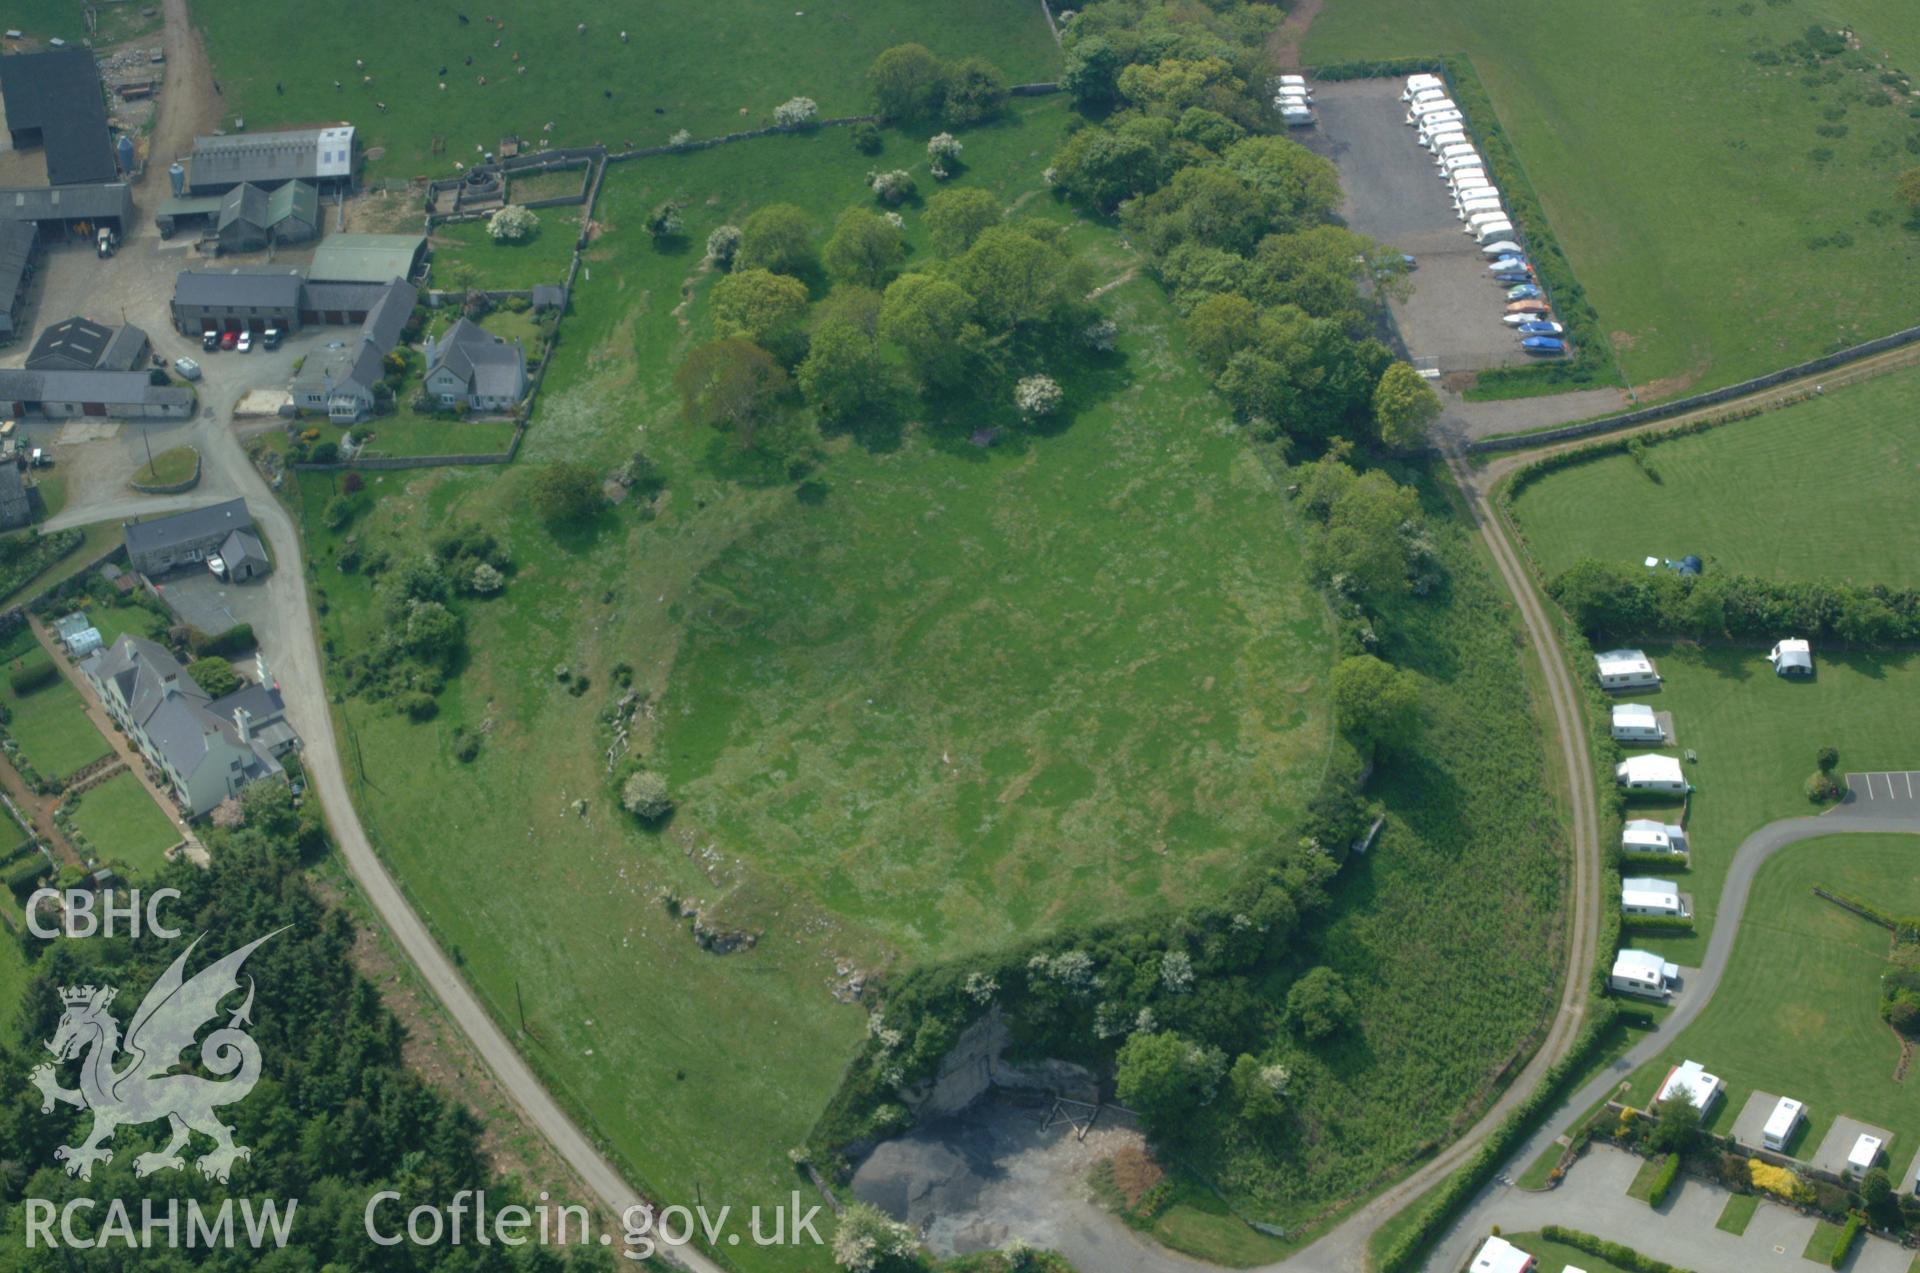 RCAHMW colour oblique aerial photograph of Parciau Hillfort taken on 26/05/2004 by Toby Driver